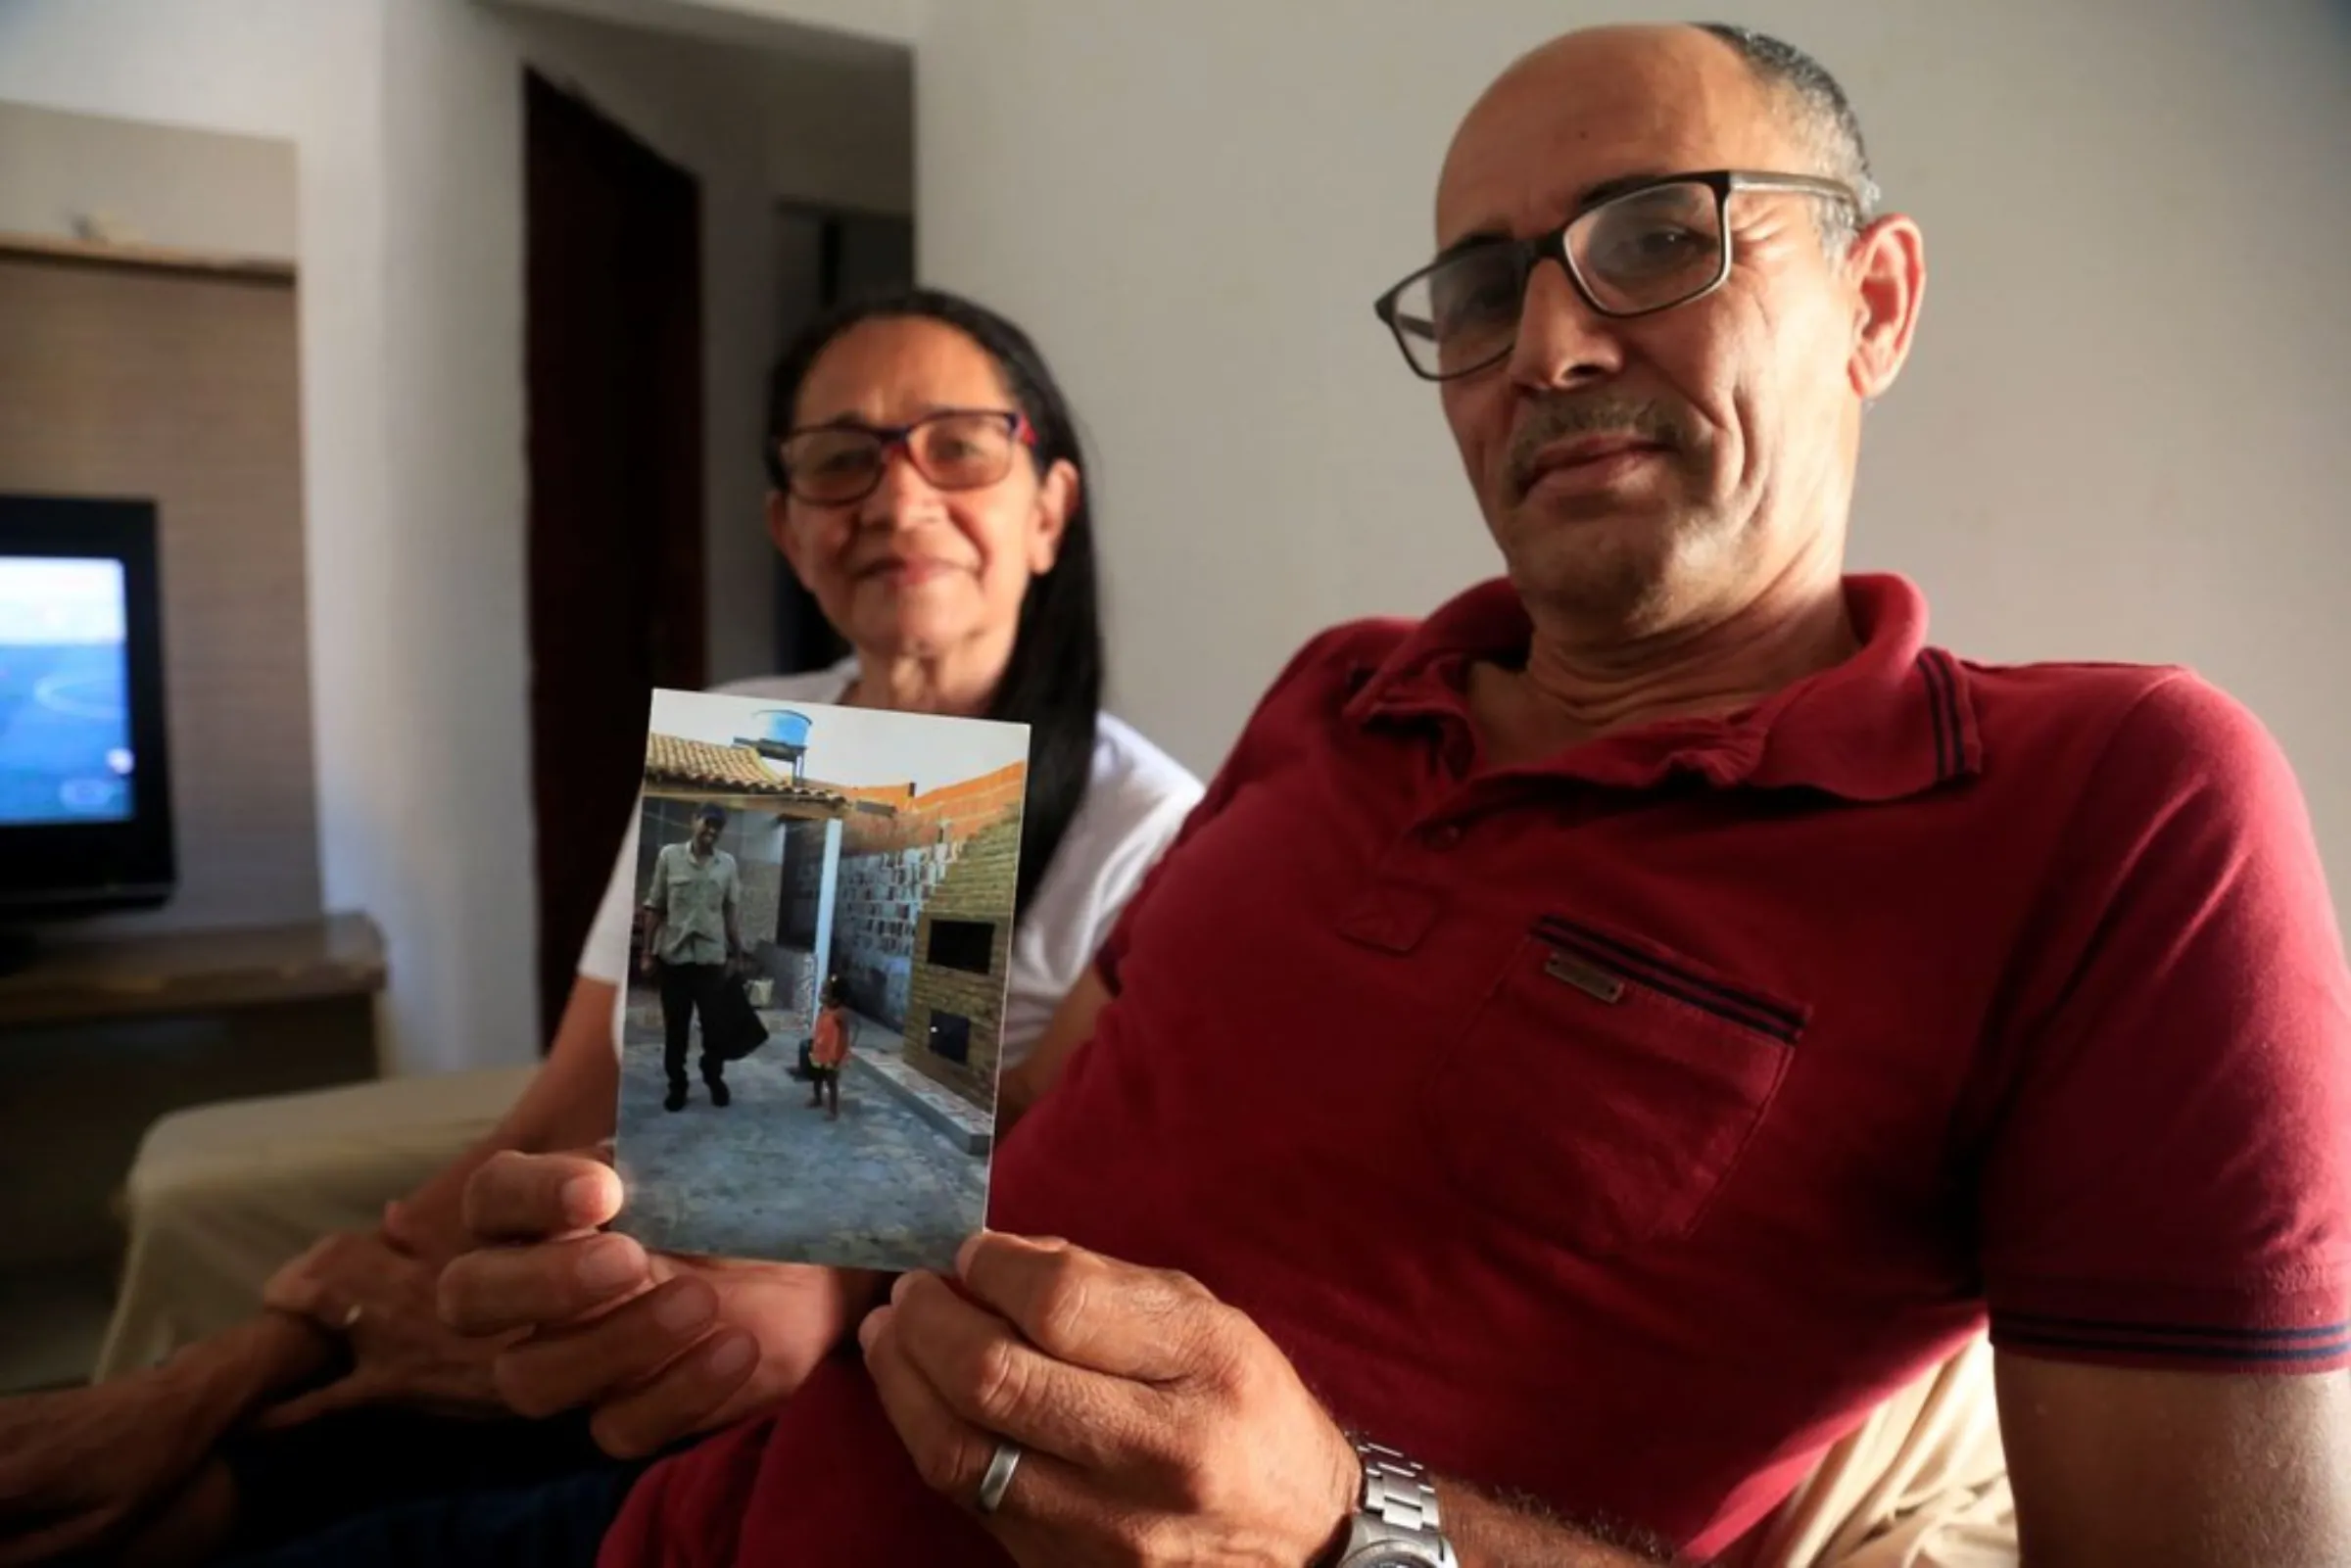 Jose Cicero Lemos, a former sugarcane worker, and his wife, shows off a picture of his younger self in Atalaia, Brazil, September 26, 2021